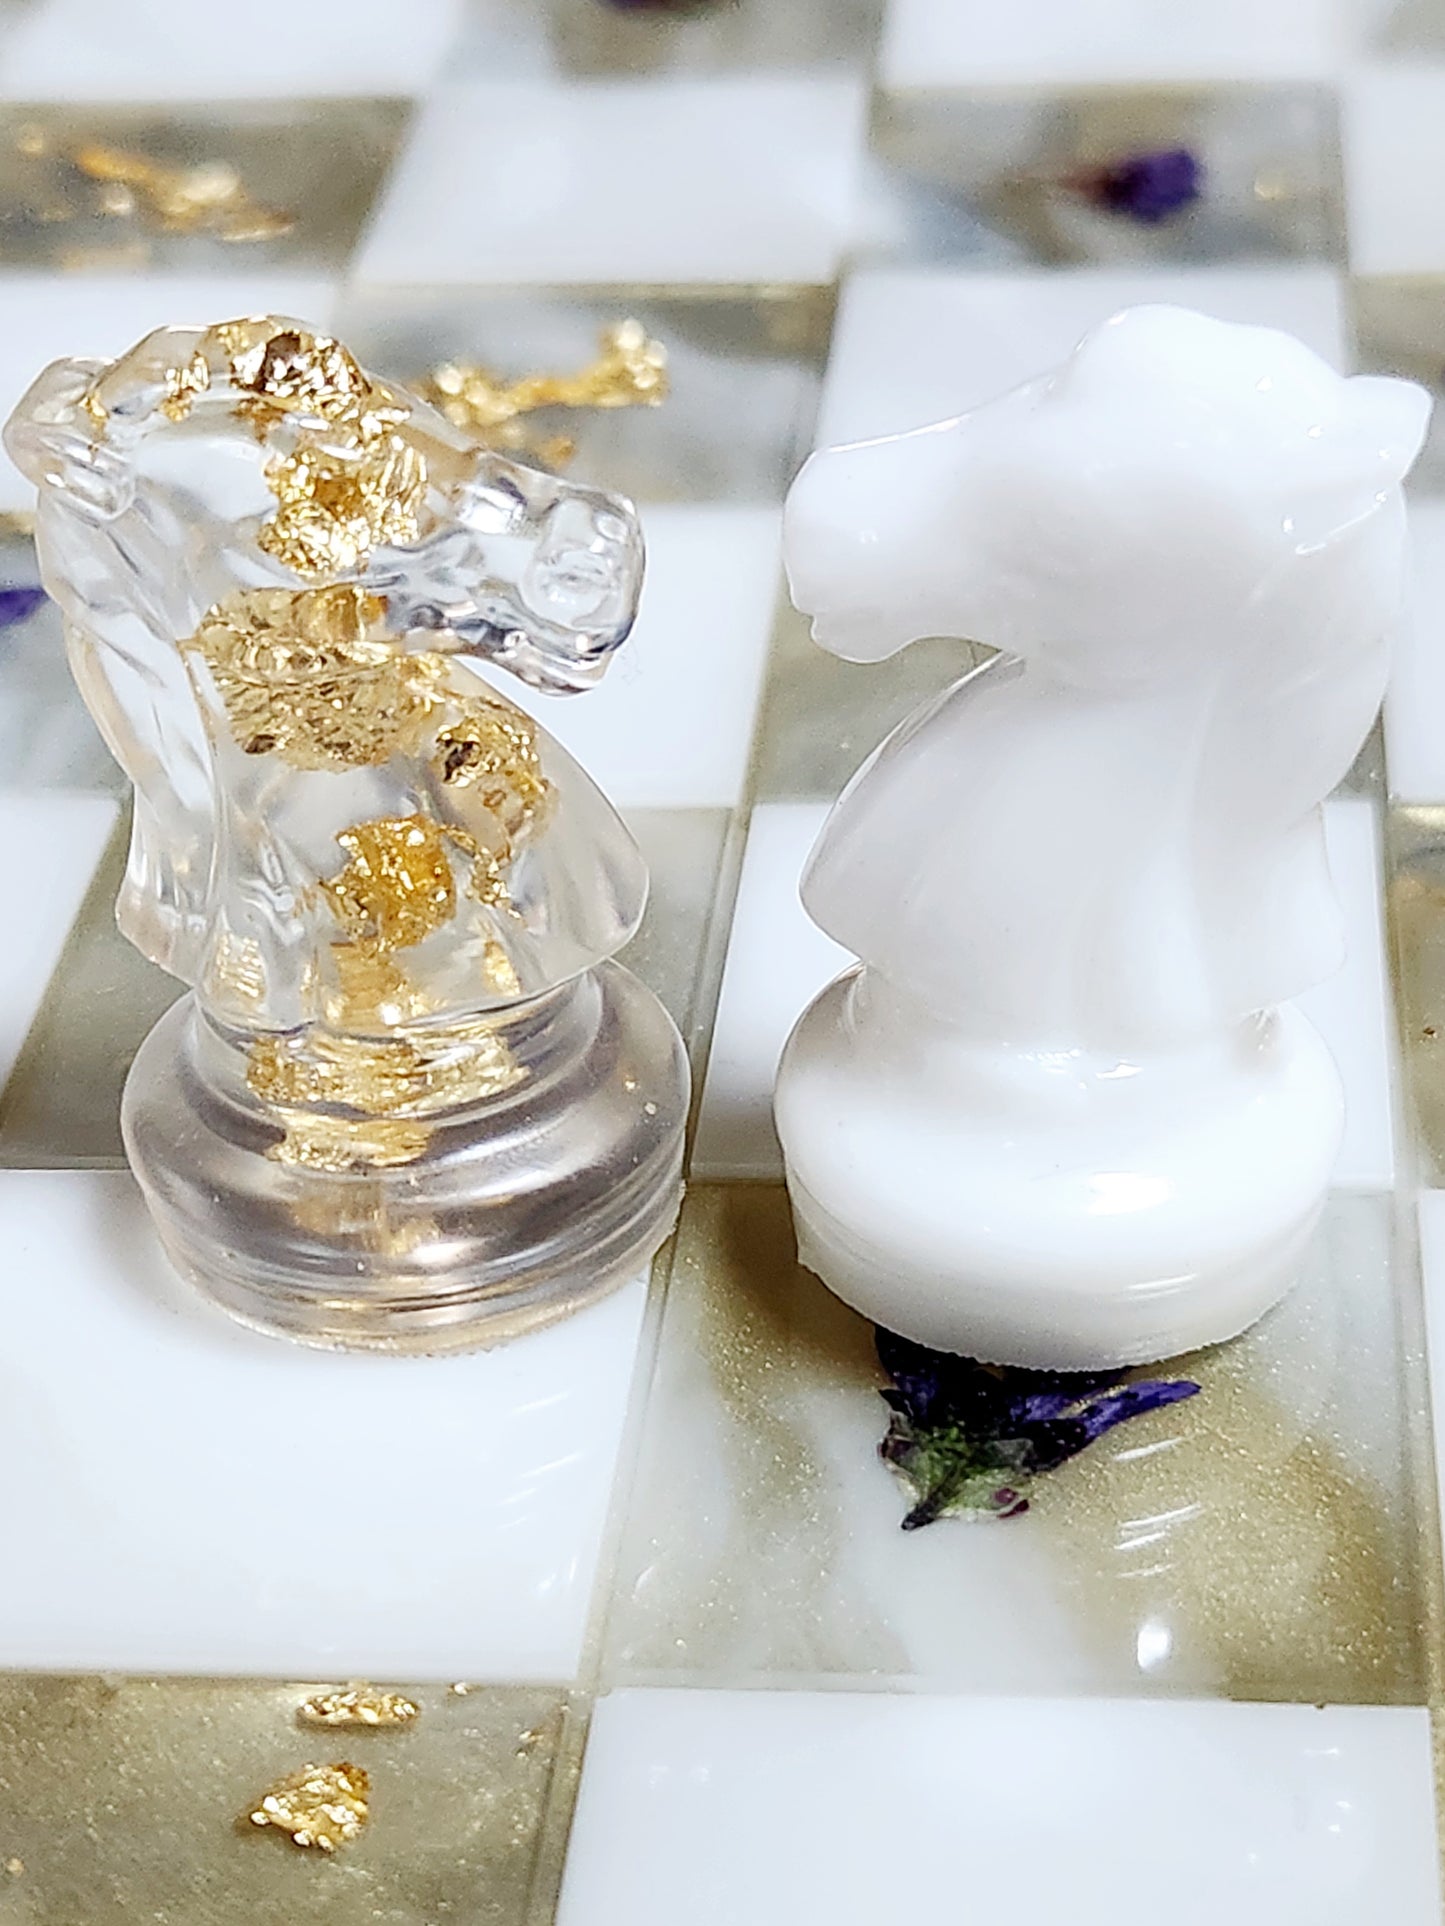 Chess set - board and pieces, purple saxifrage and gold foil.